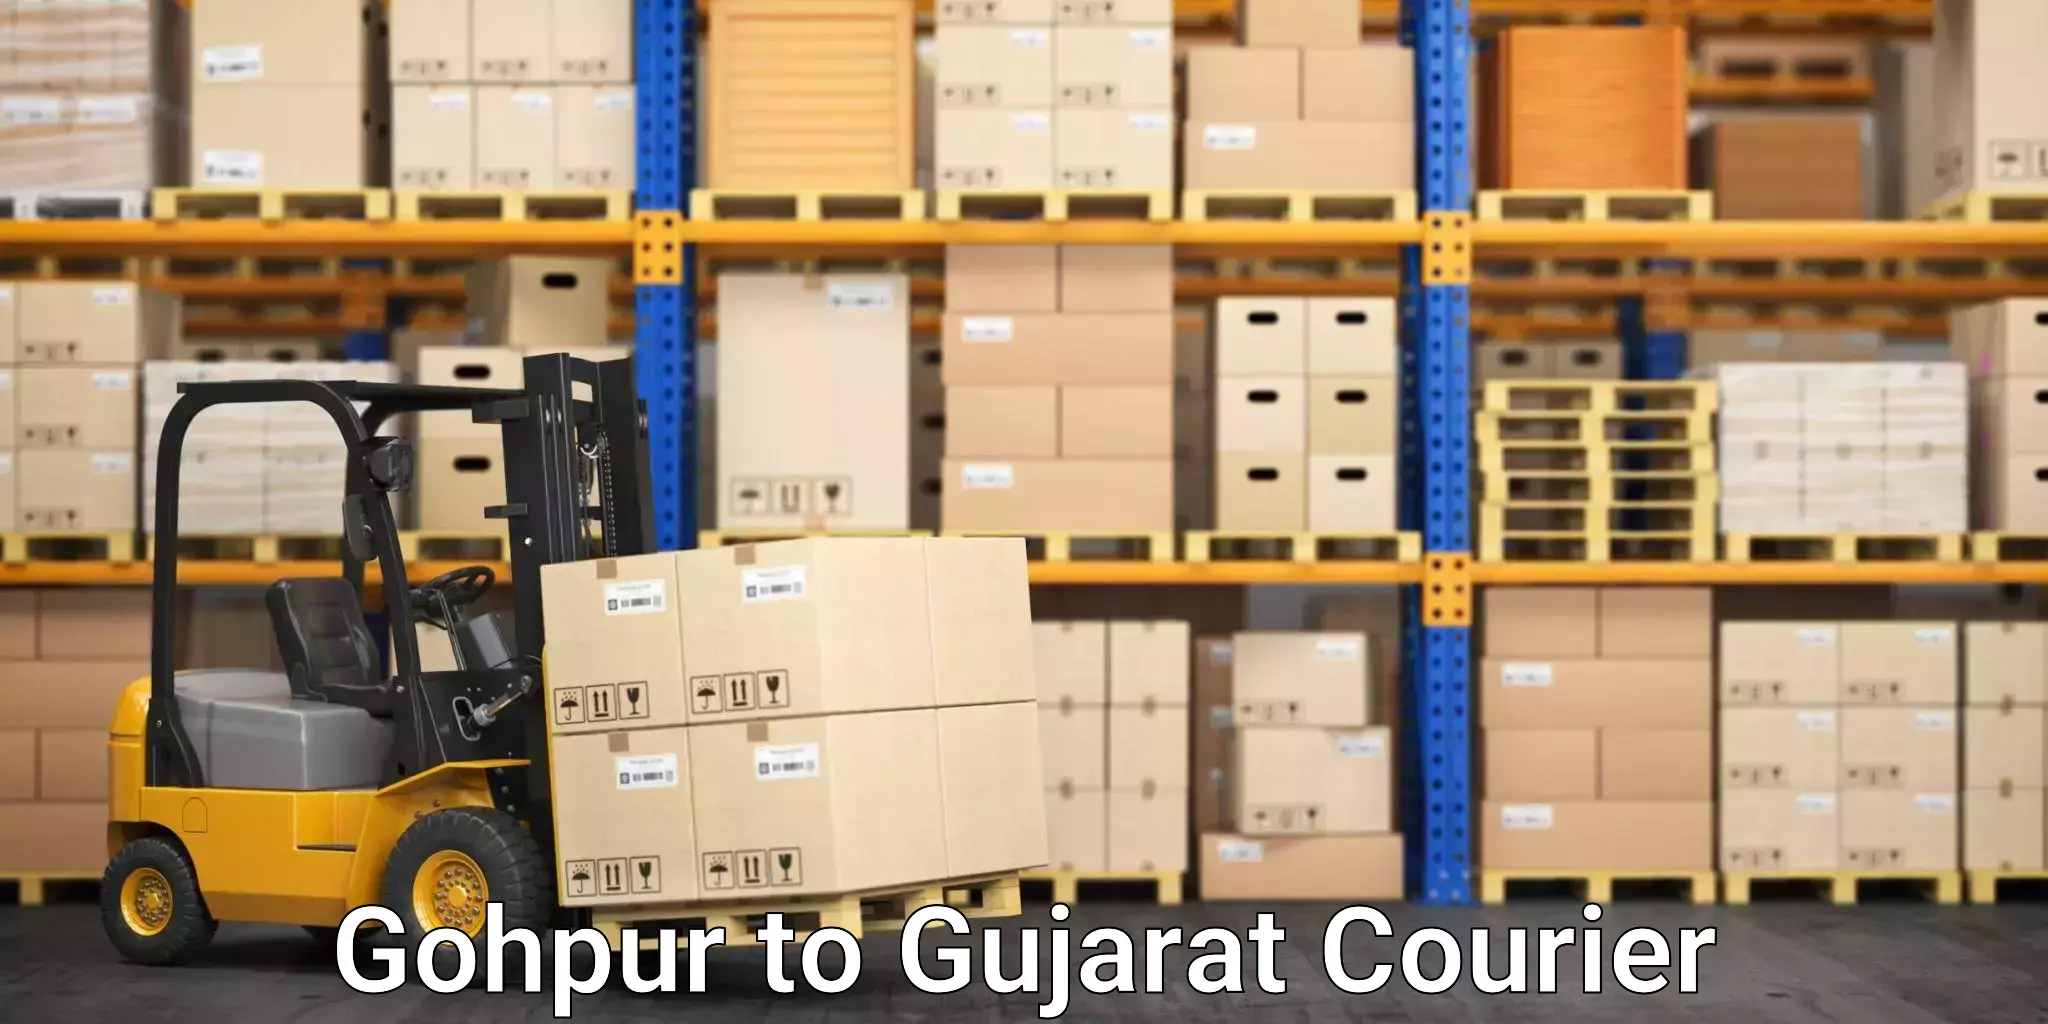 Discounted shipping in Gohpur to Ankleshwar